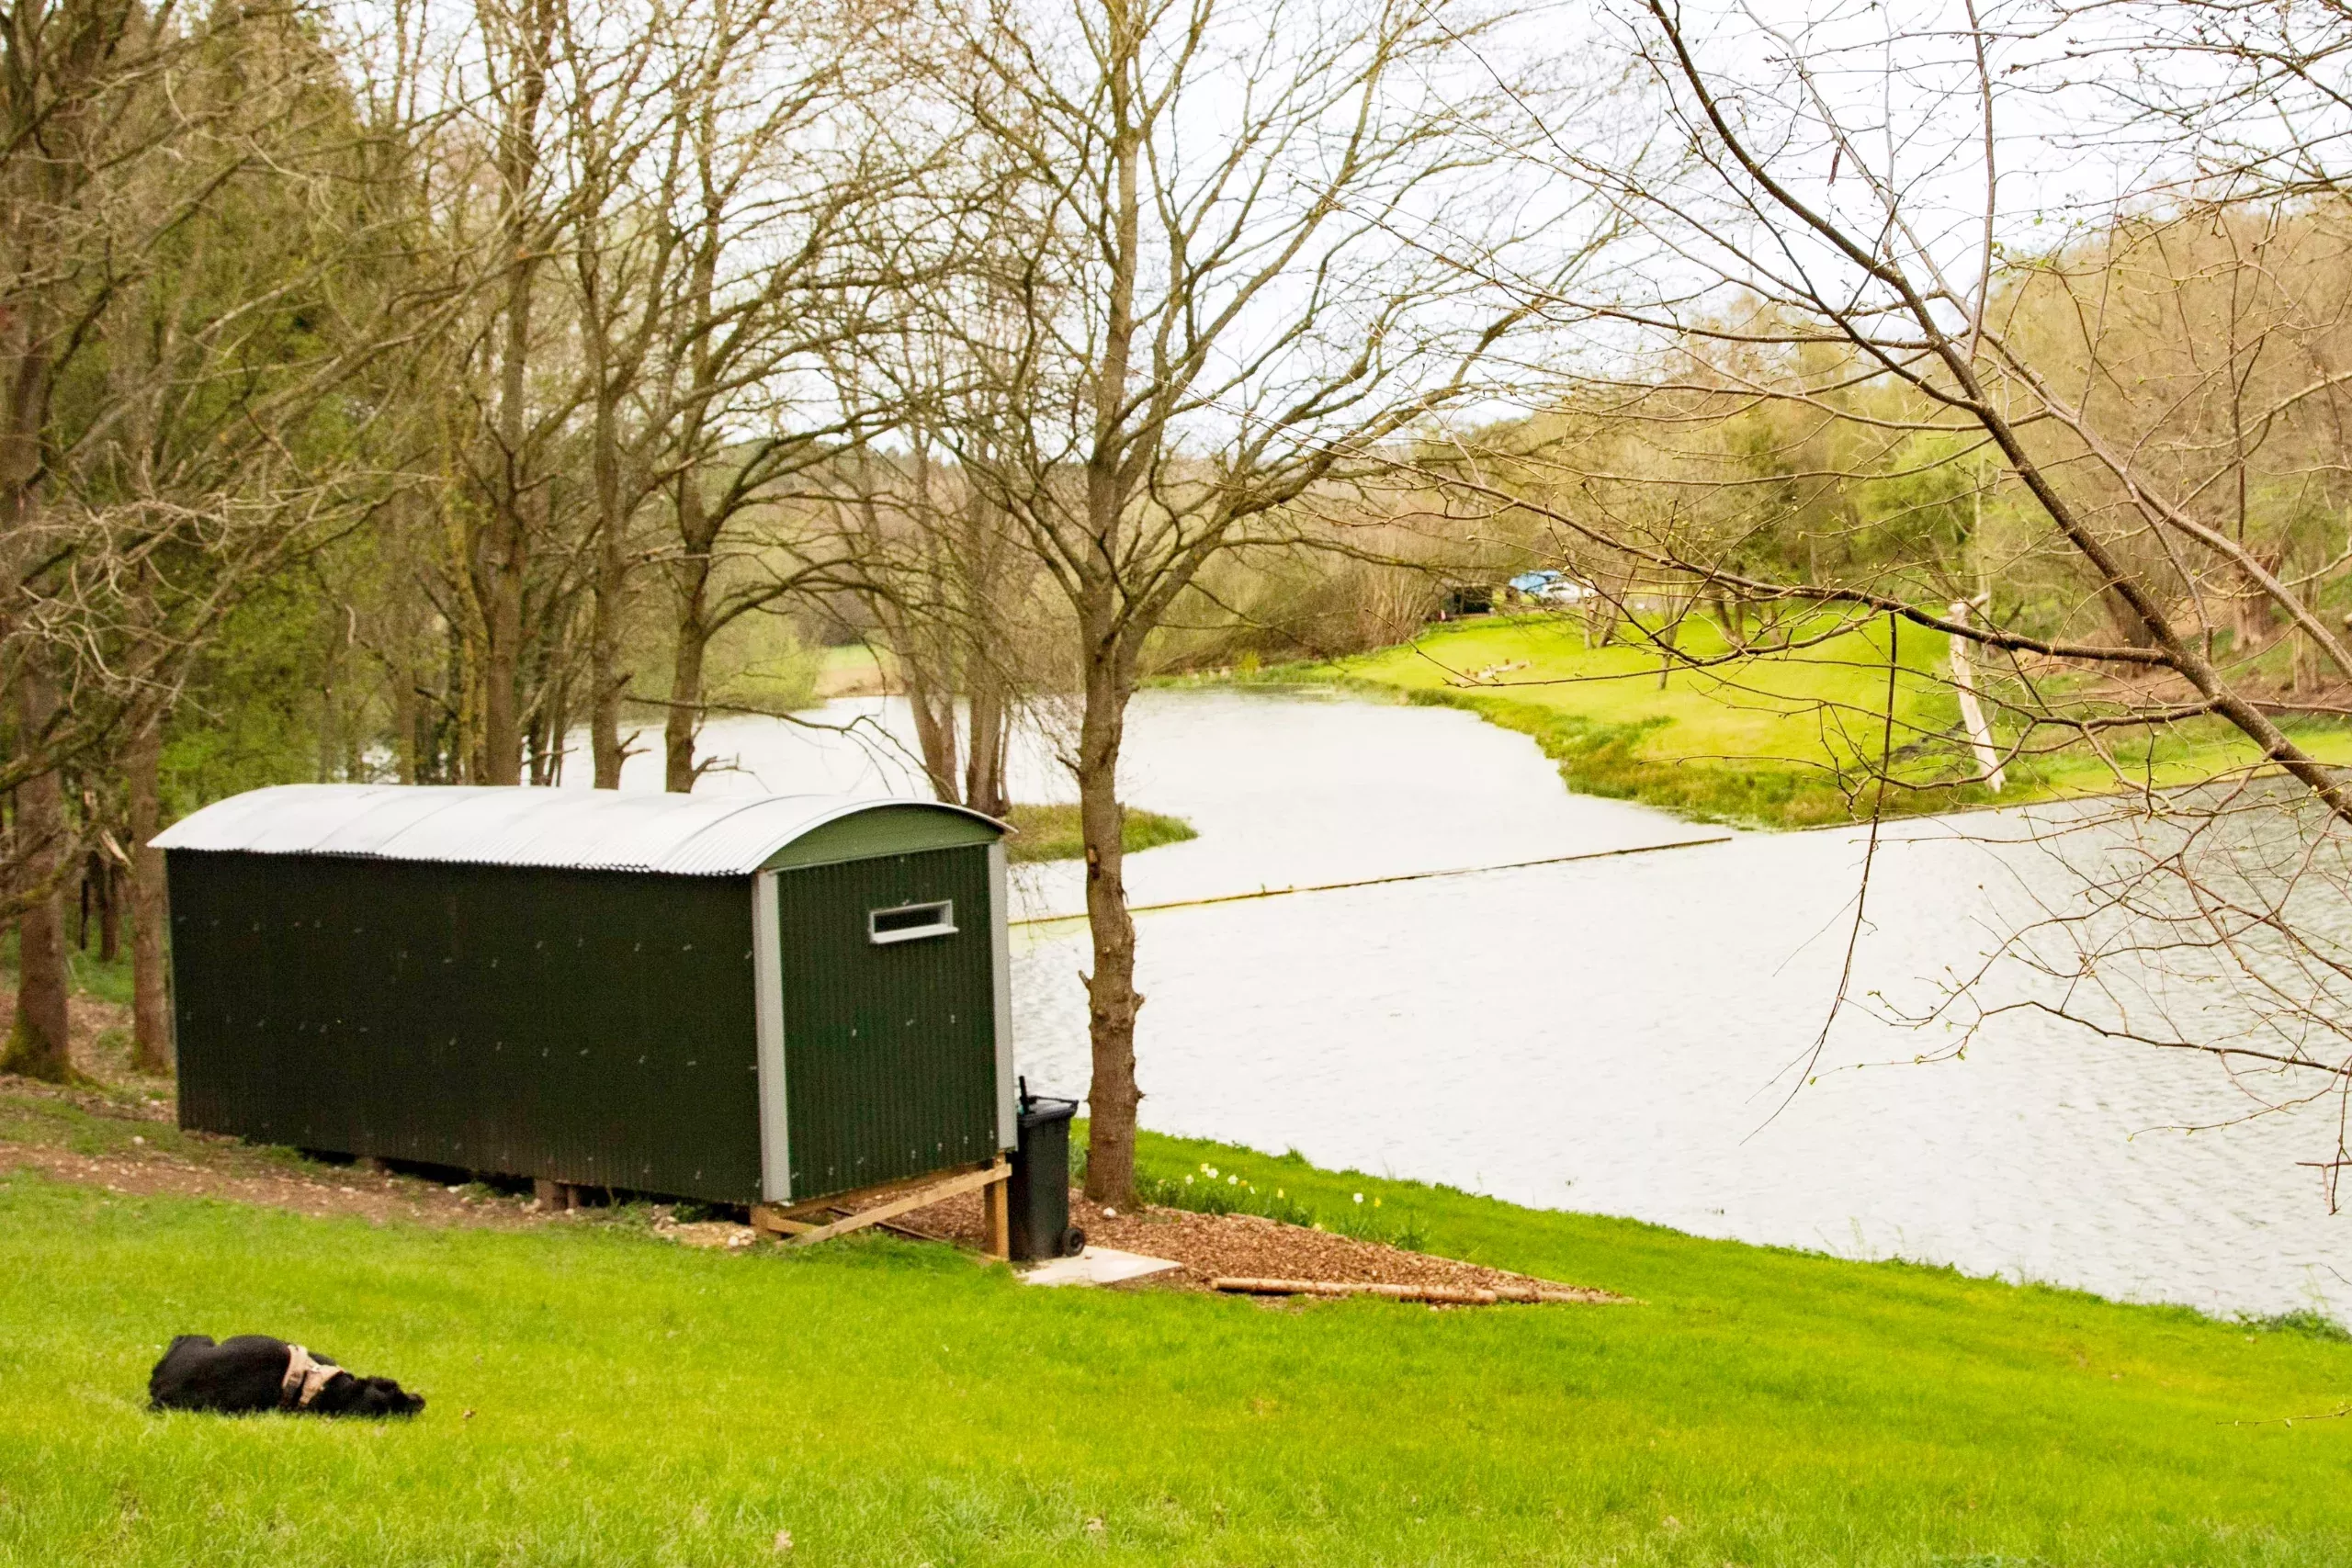 our shepherds hut gacing out on to a lake with a dog lounging in the foreground